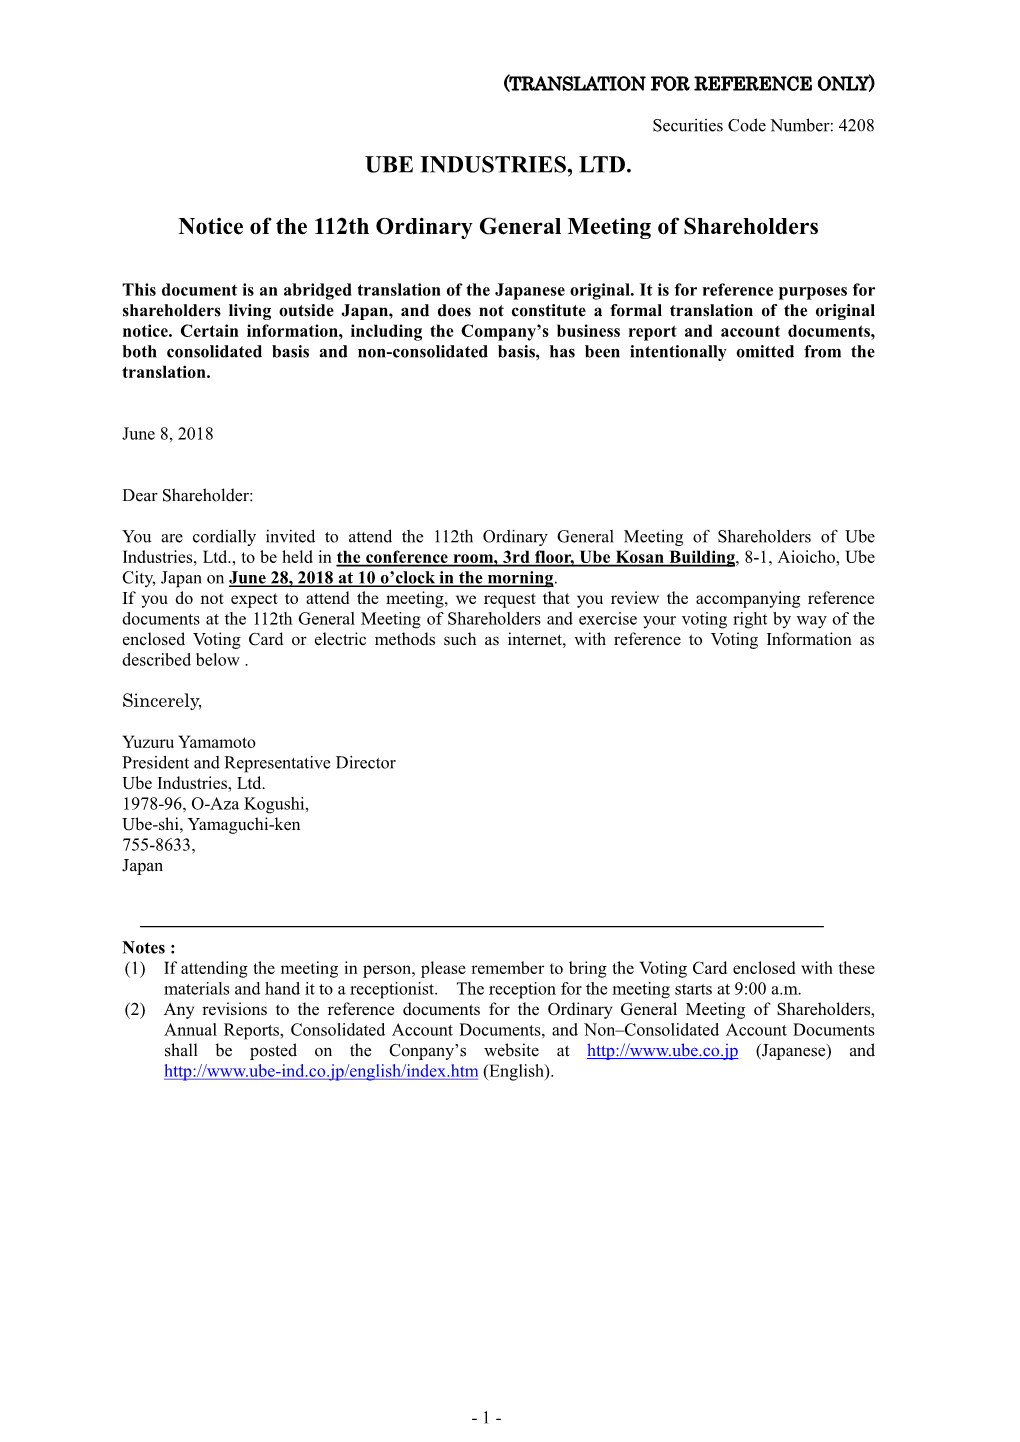 Notice of the 112Th Ordinary General Meeting of Shareholders